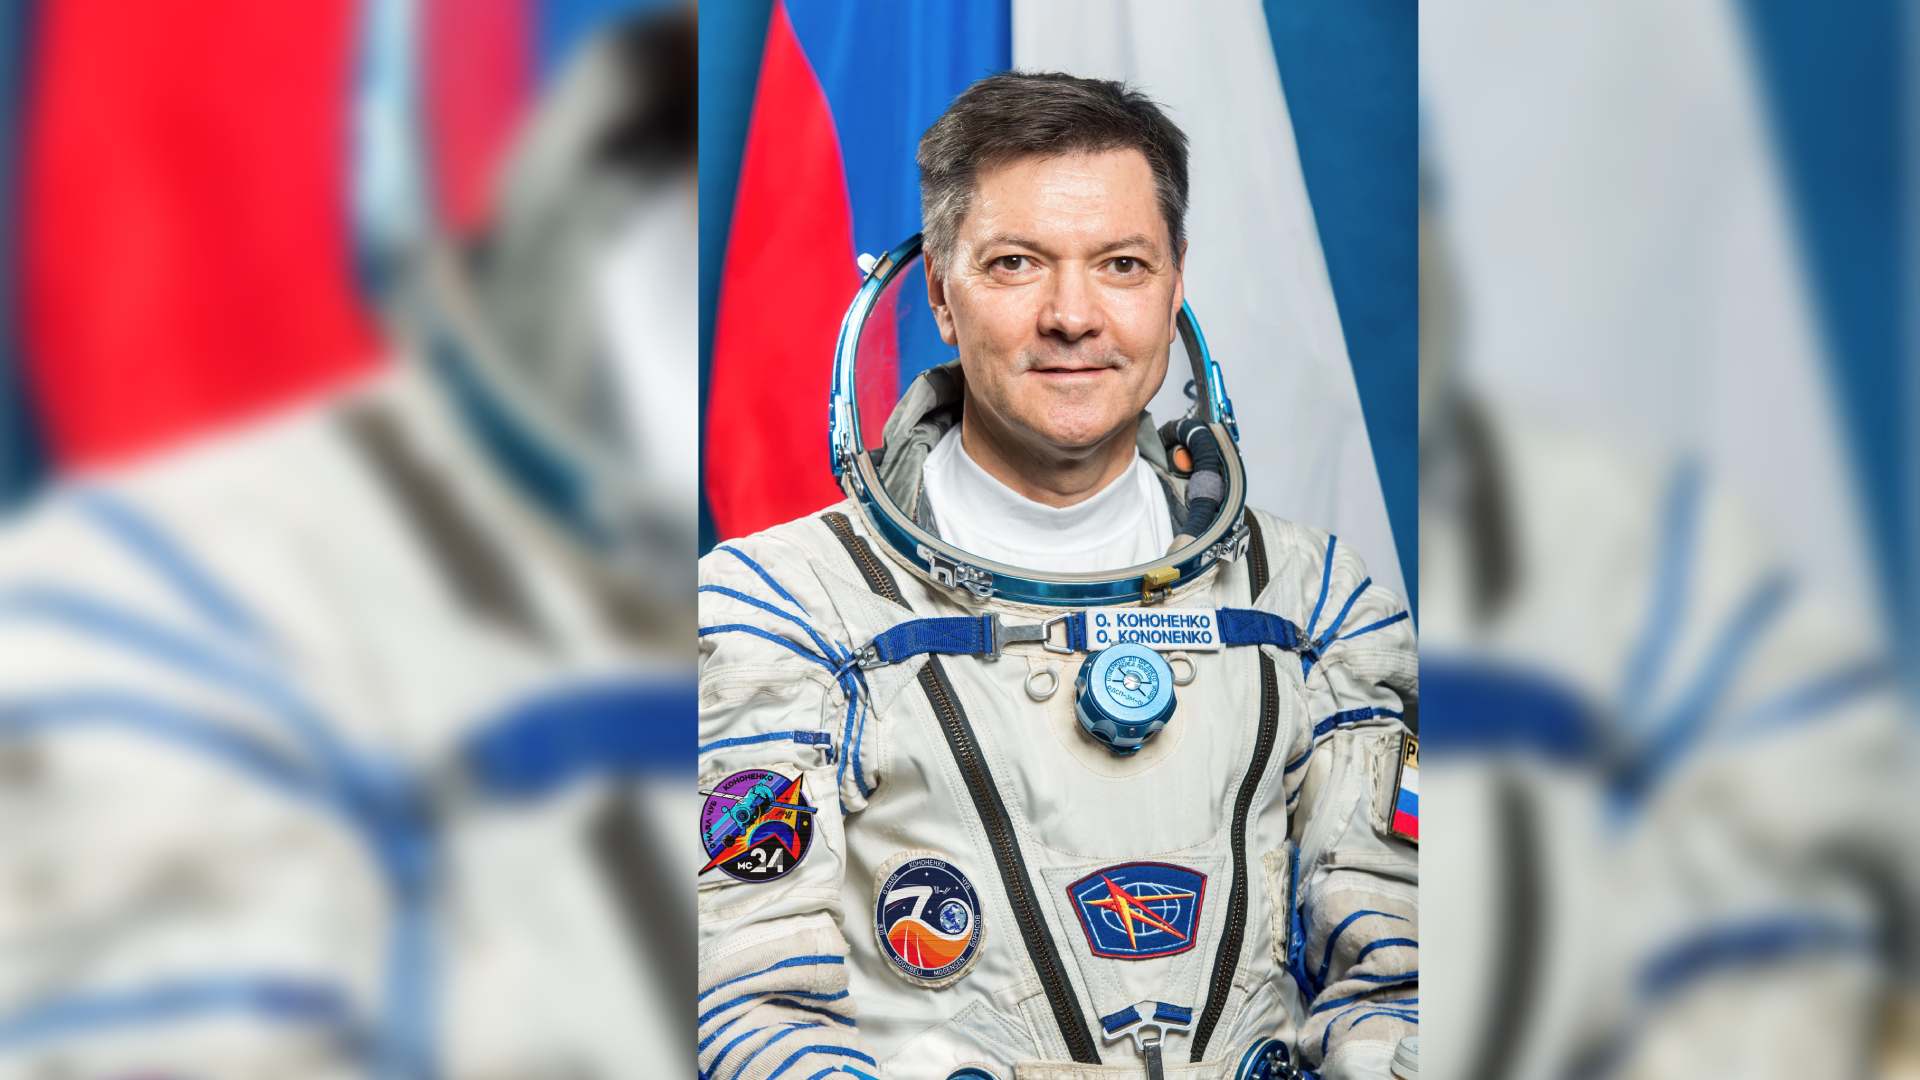 Science News Roundup: Russian cosmonaut sets record for most time in space - more than 878 days